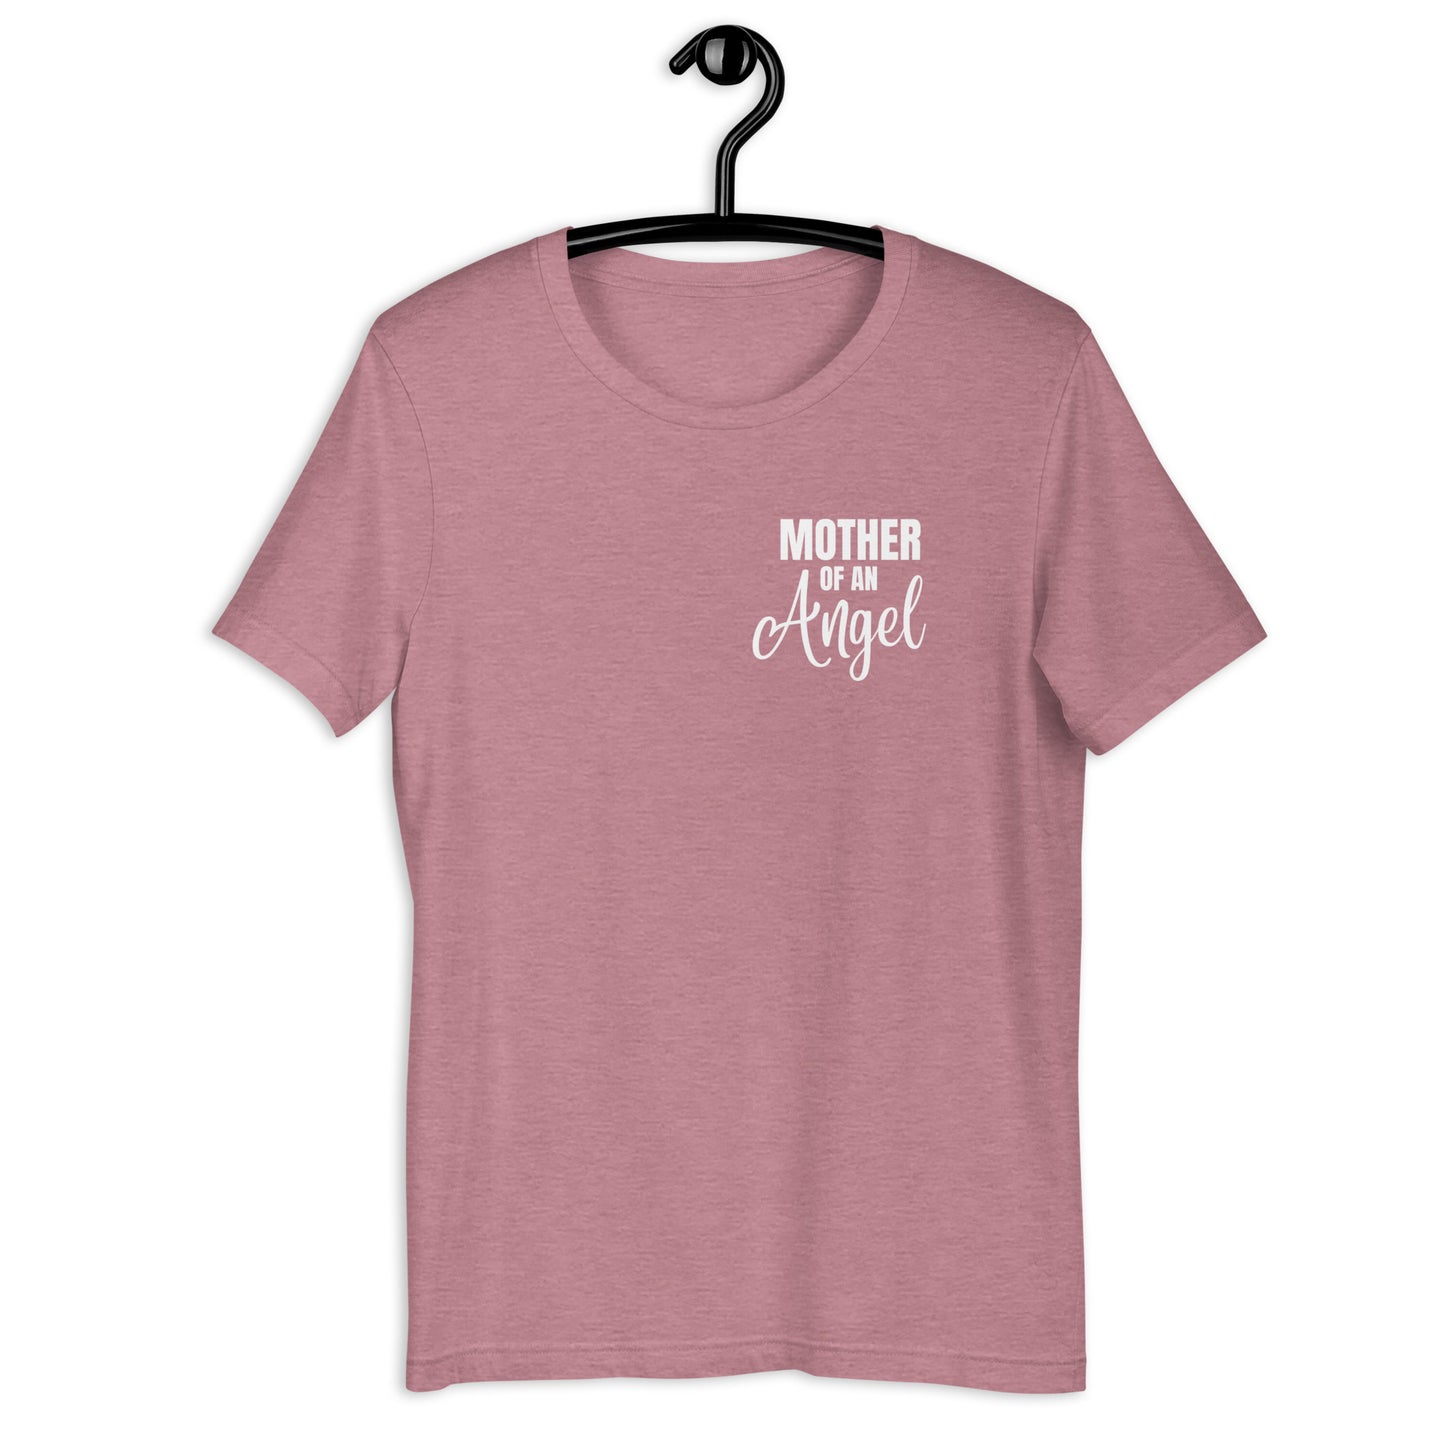 MOTHER OF AN ANGEL TEE - Daughter Of An Angel